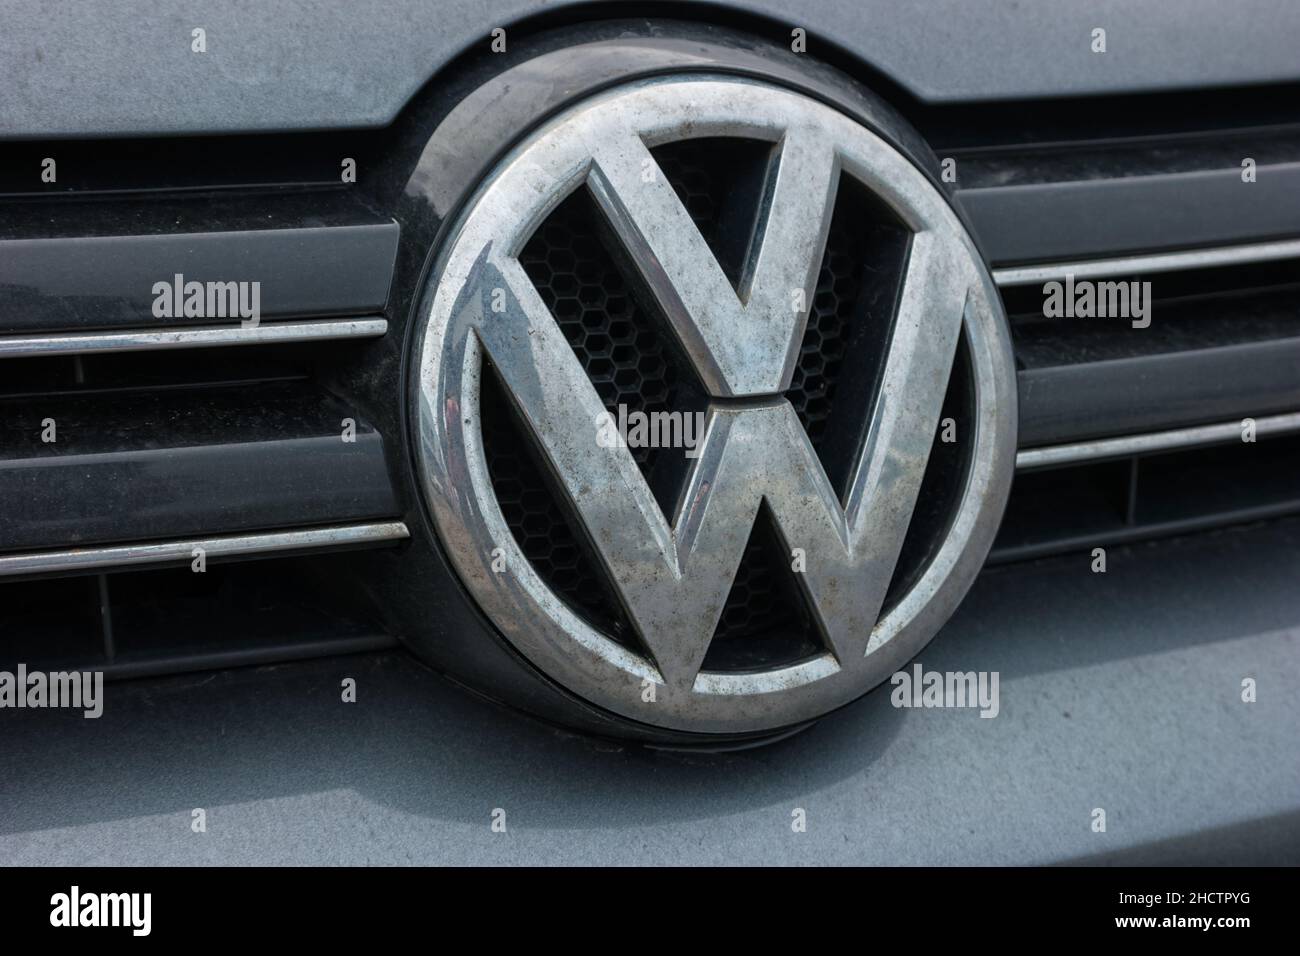 Dirty Volkswagen VW plate logo on a car grilll. Volkswagen is a famous European car manufacturer company based on Germany. Stock Photo